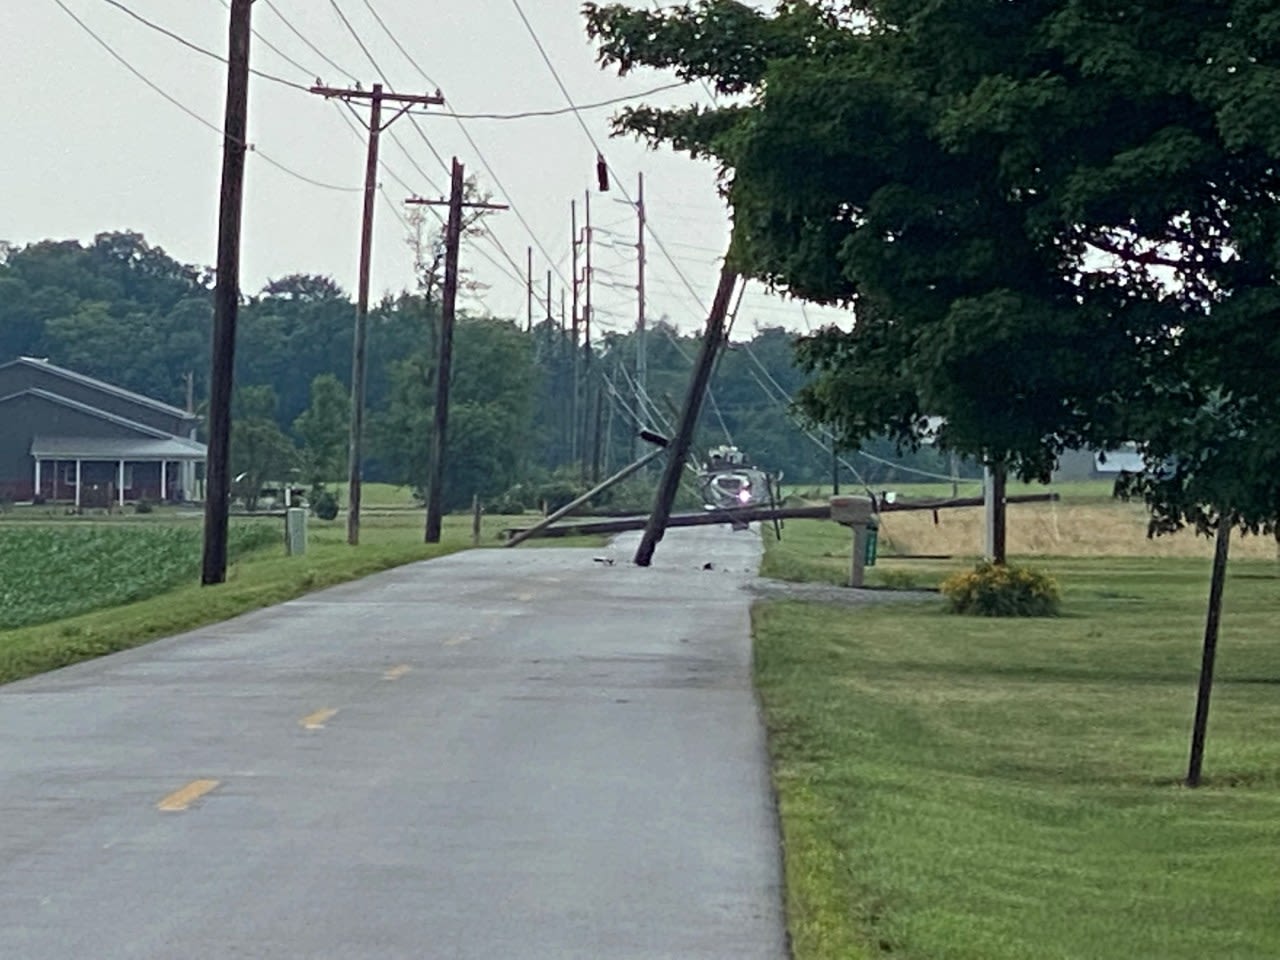 More than 2K without power; AES Ohio, public works work to minimize outage